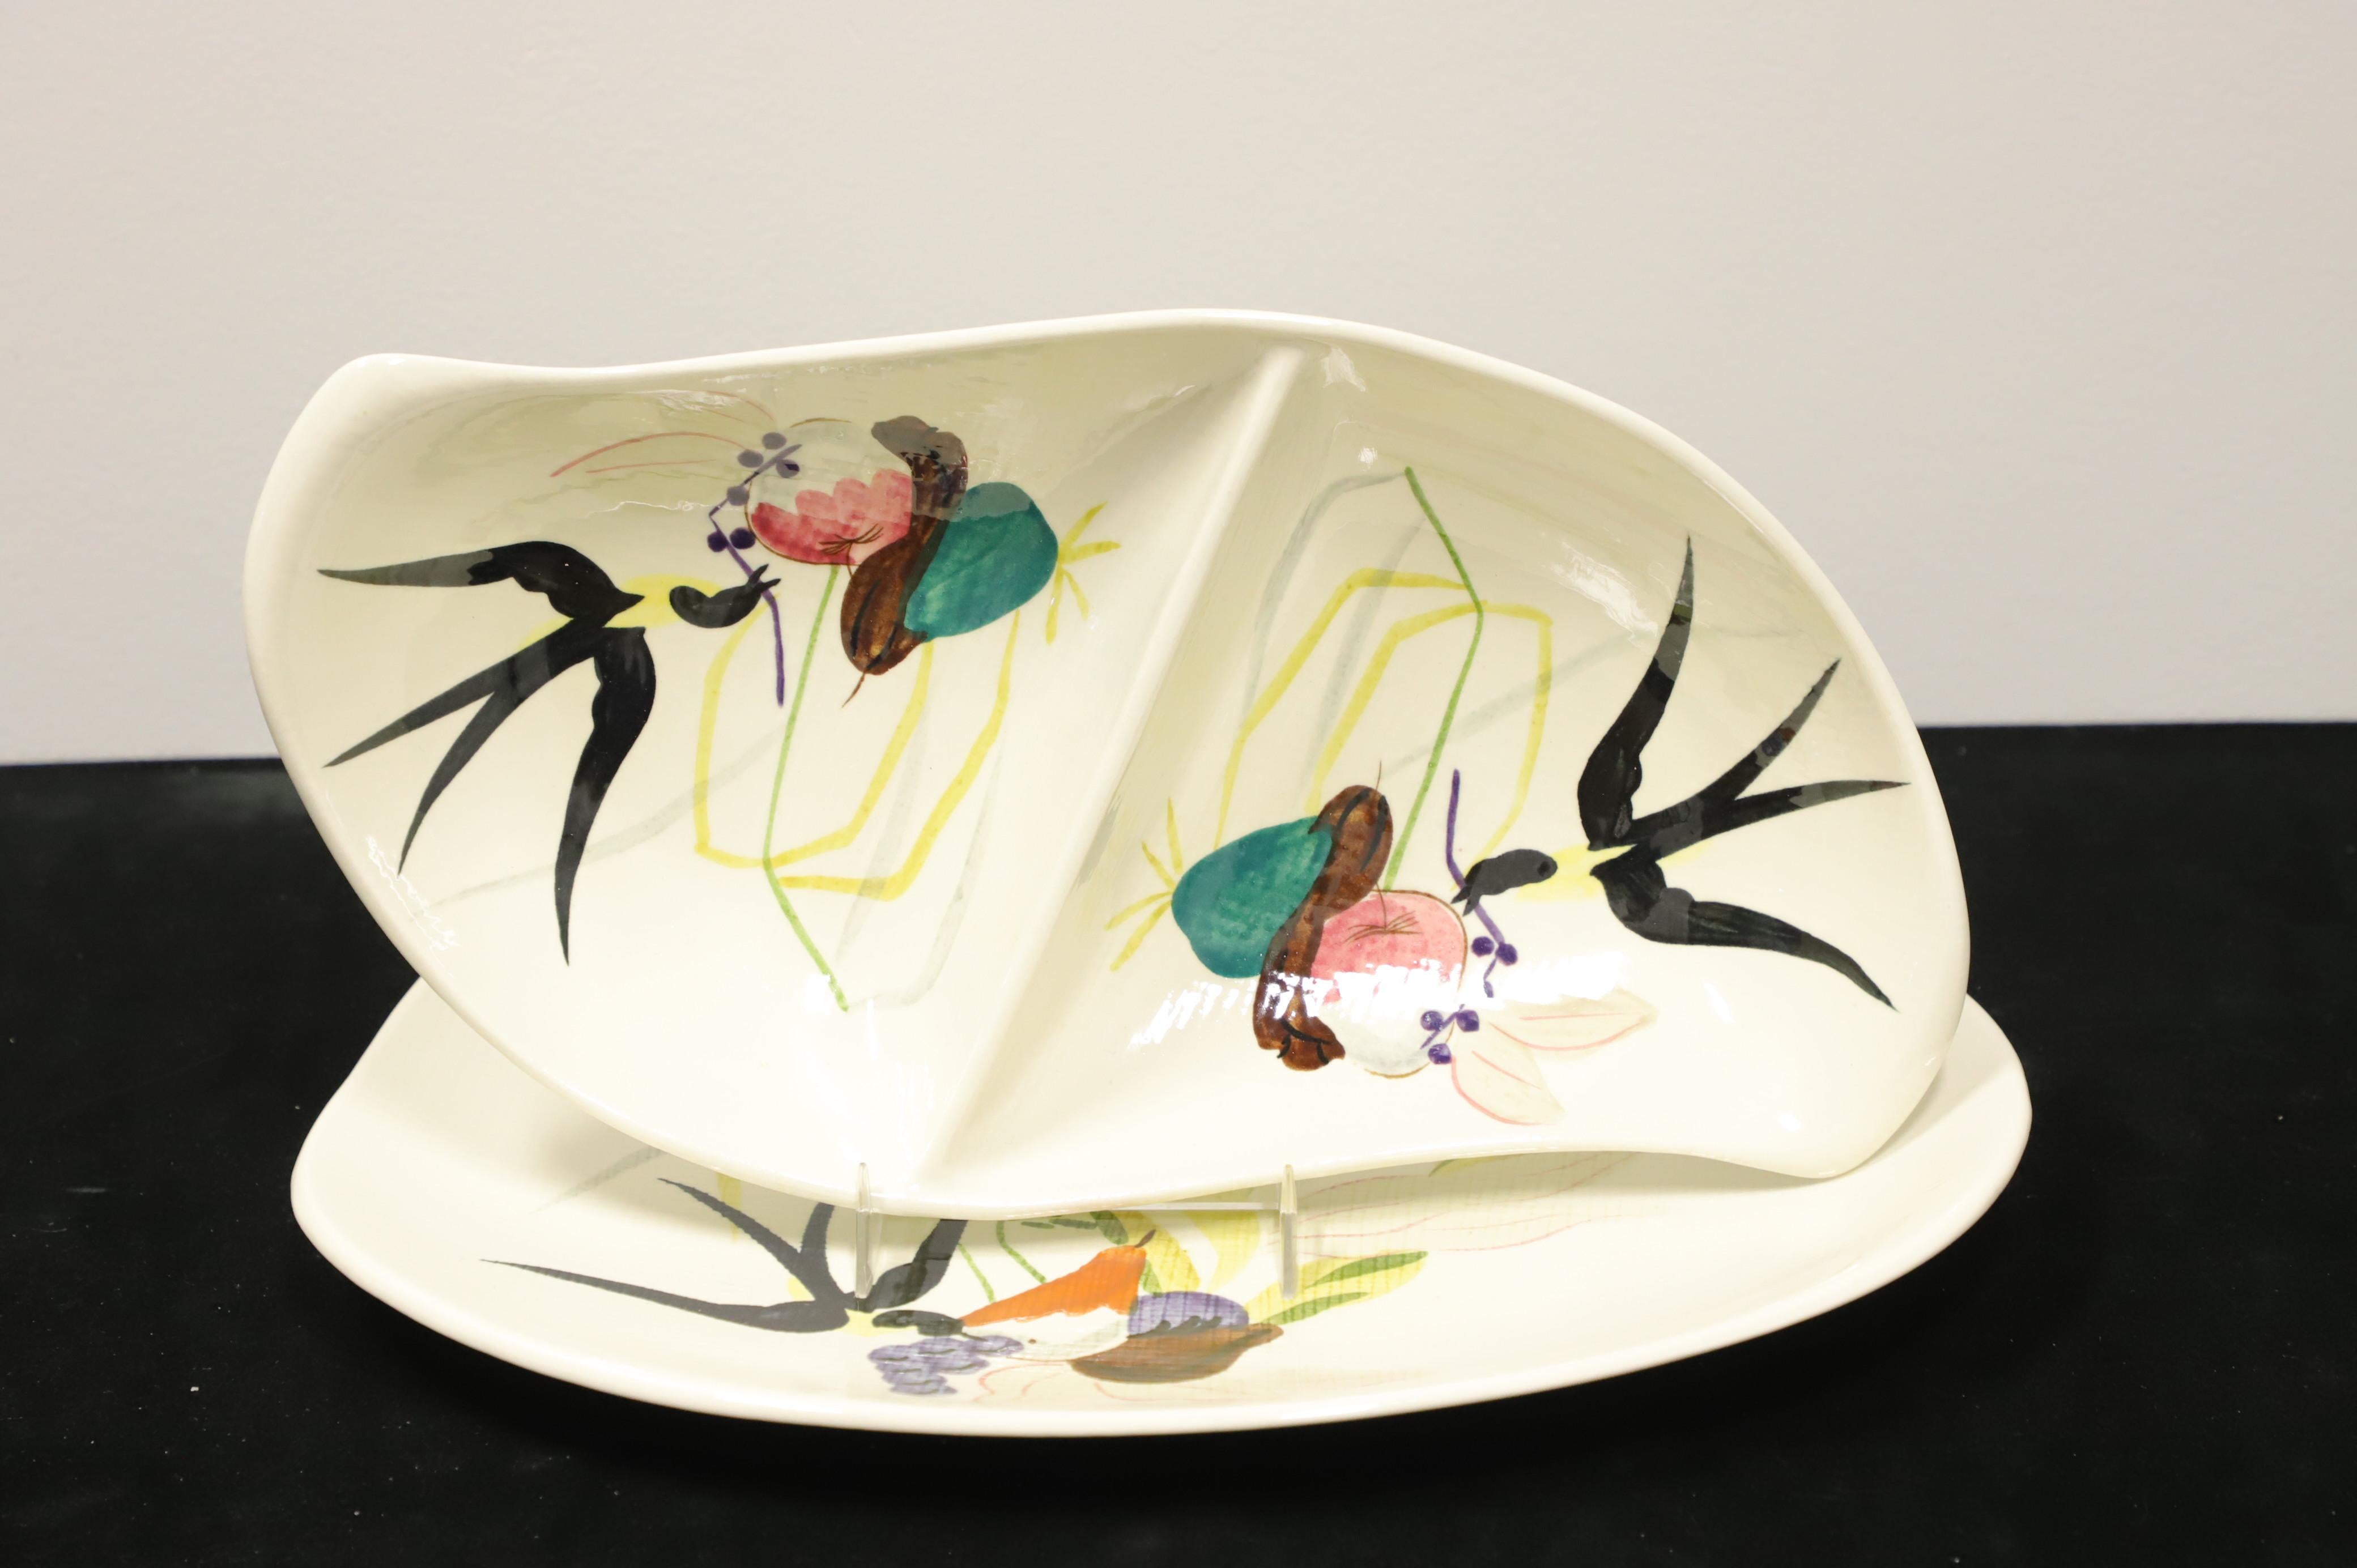 A Mid 20th Century divided vegetable bowl and platter by Red Wing, in their Capistrano pattern. Both pieces have a unique curved shape and are hand painted depicting the swallows returning to that bountiful area of California. Platter is ovenproof.